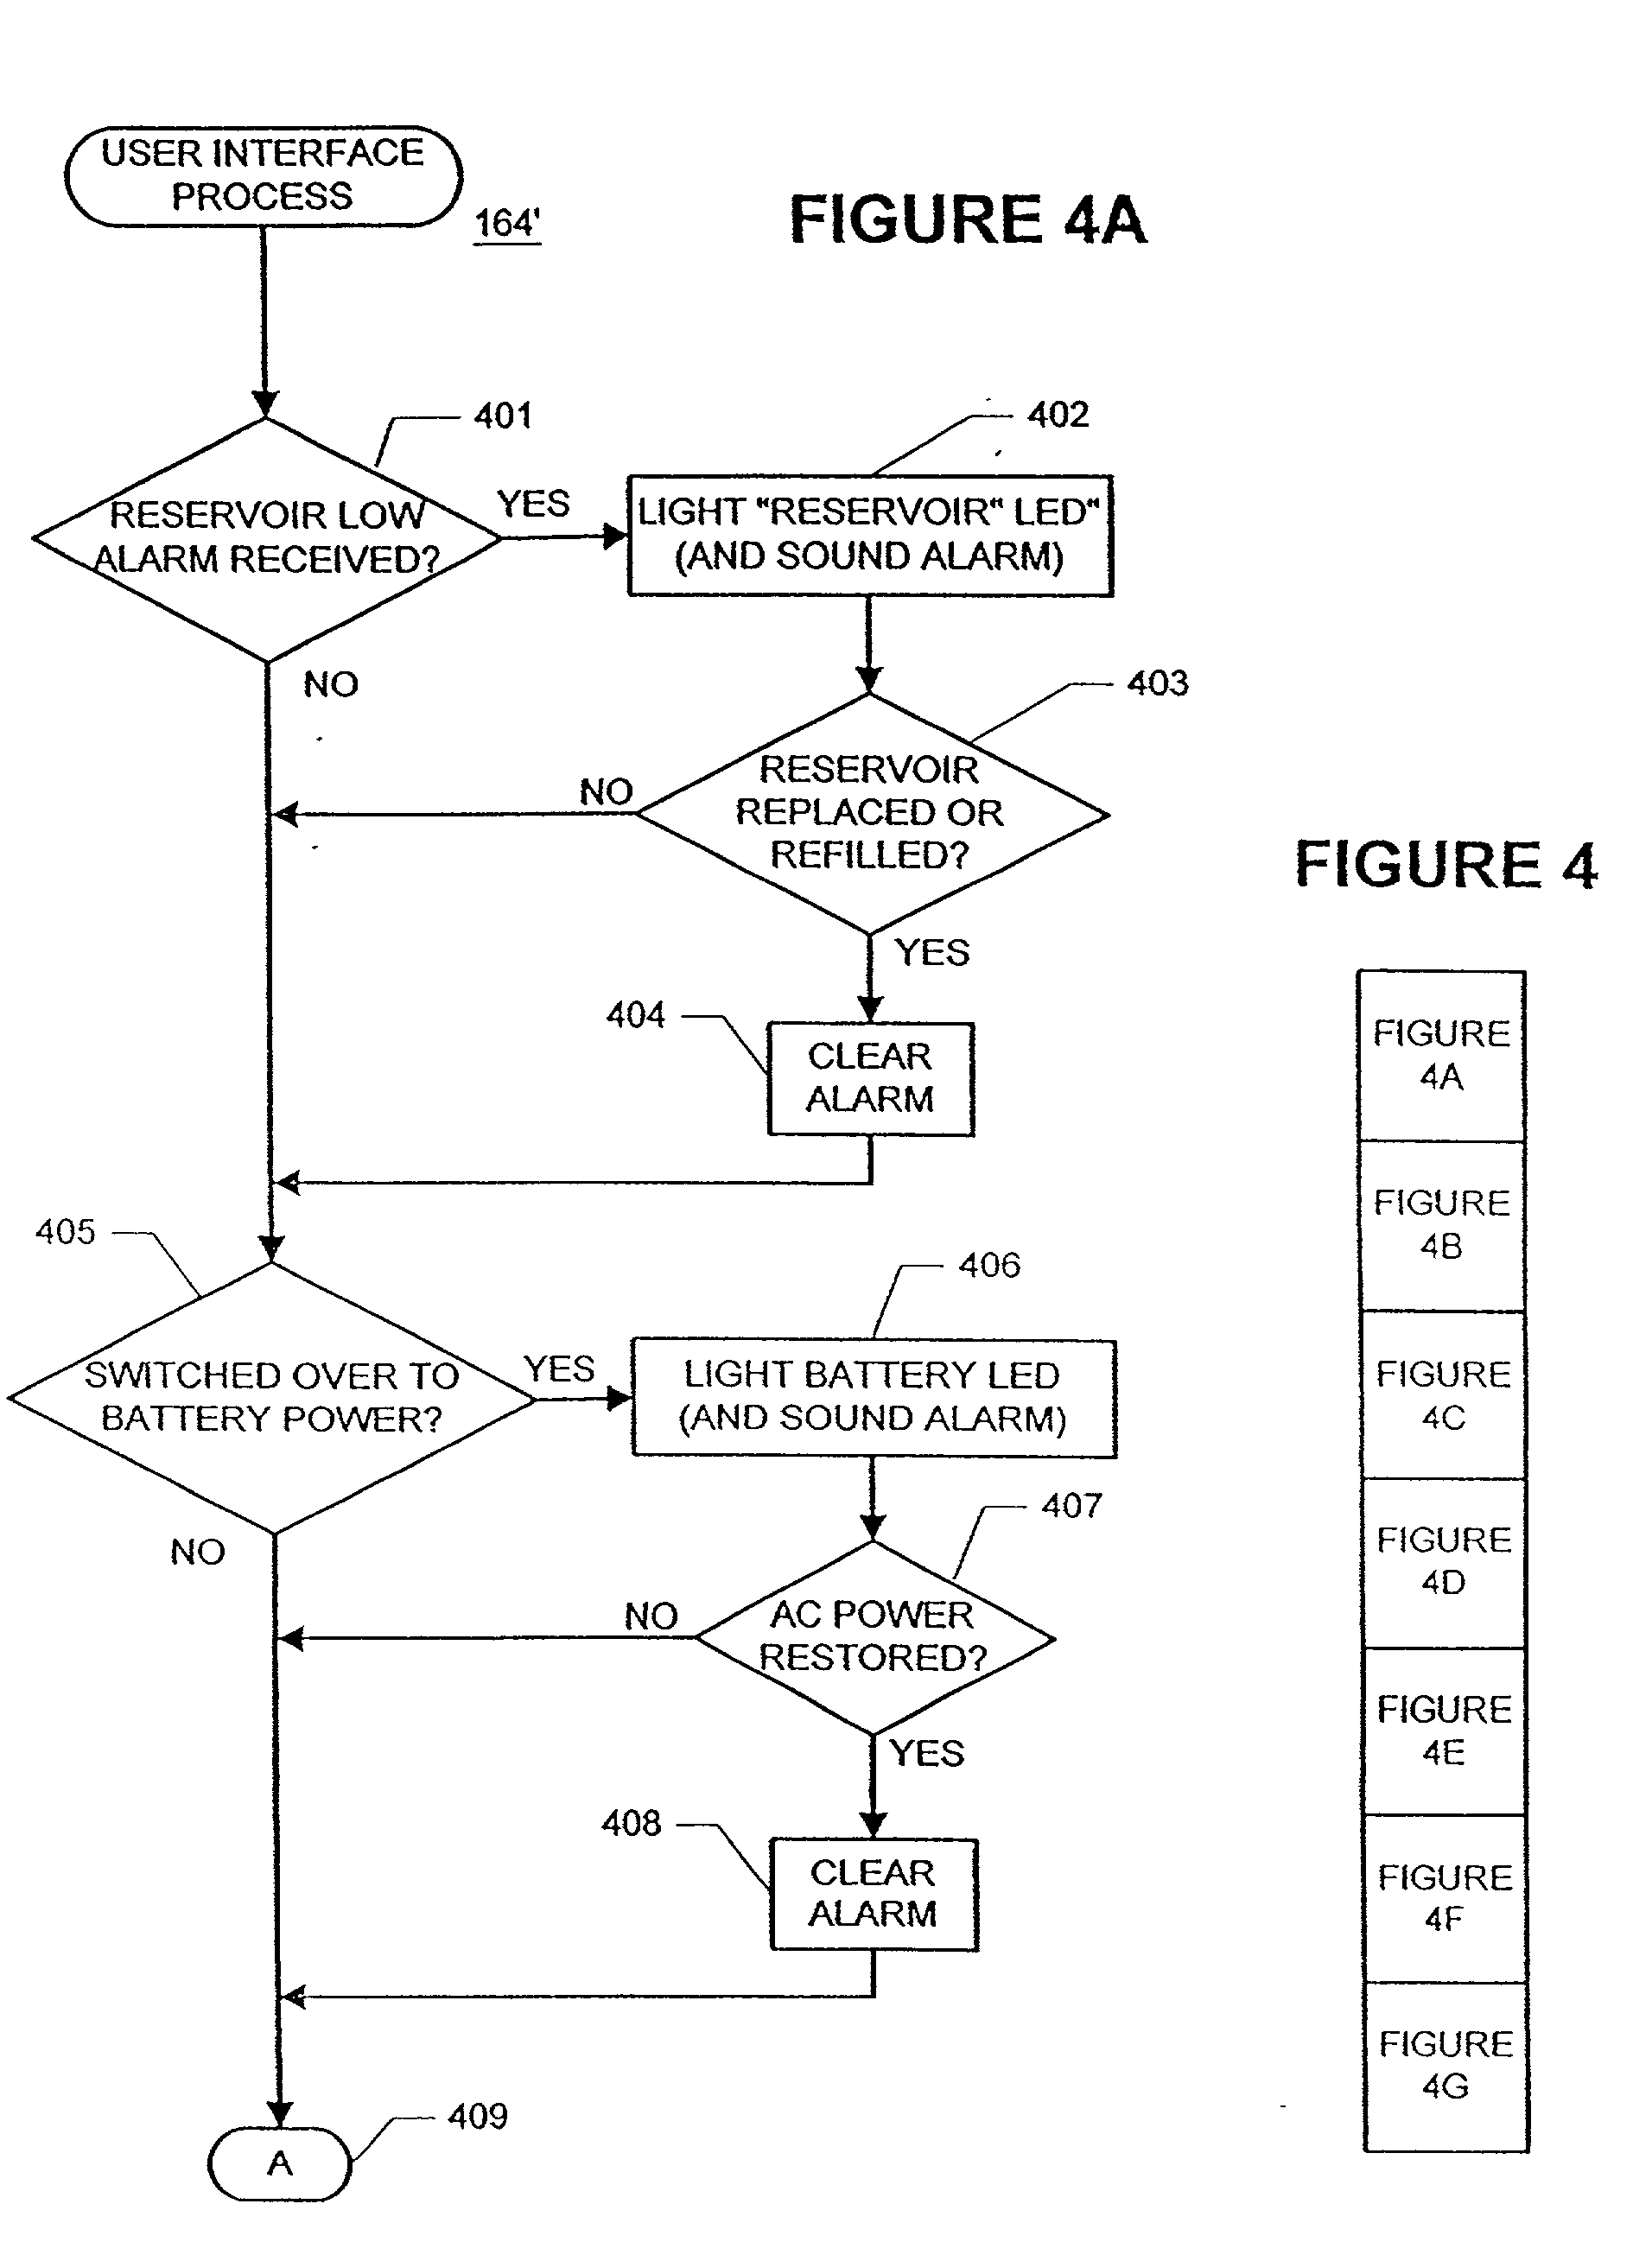 Methods and apparatus for delivering fluids